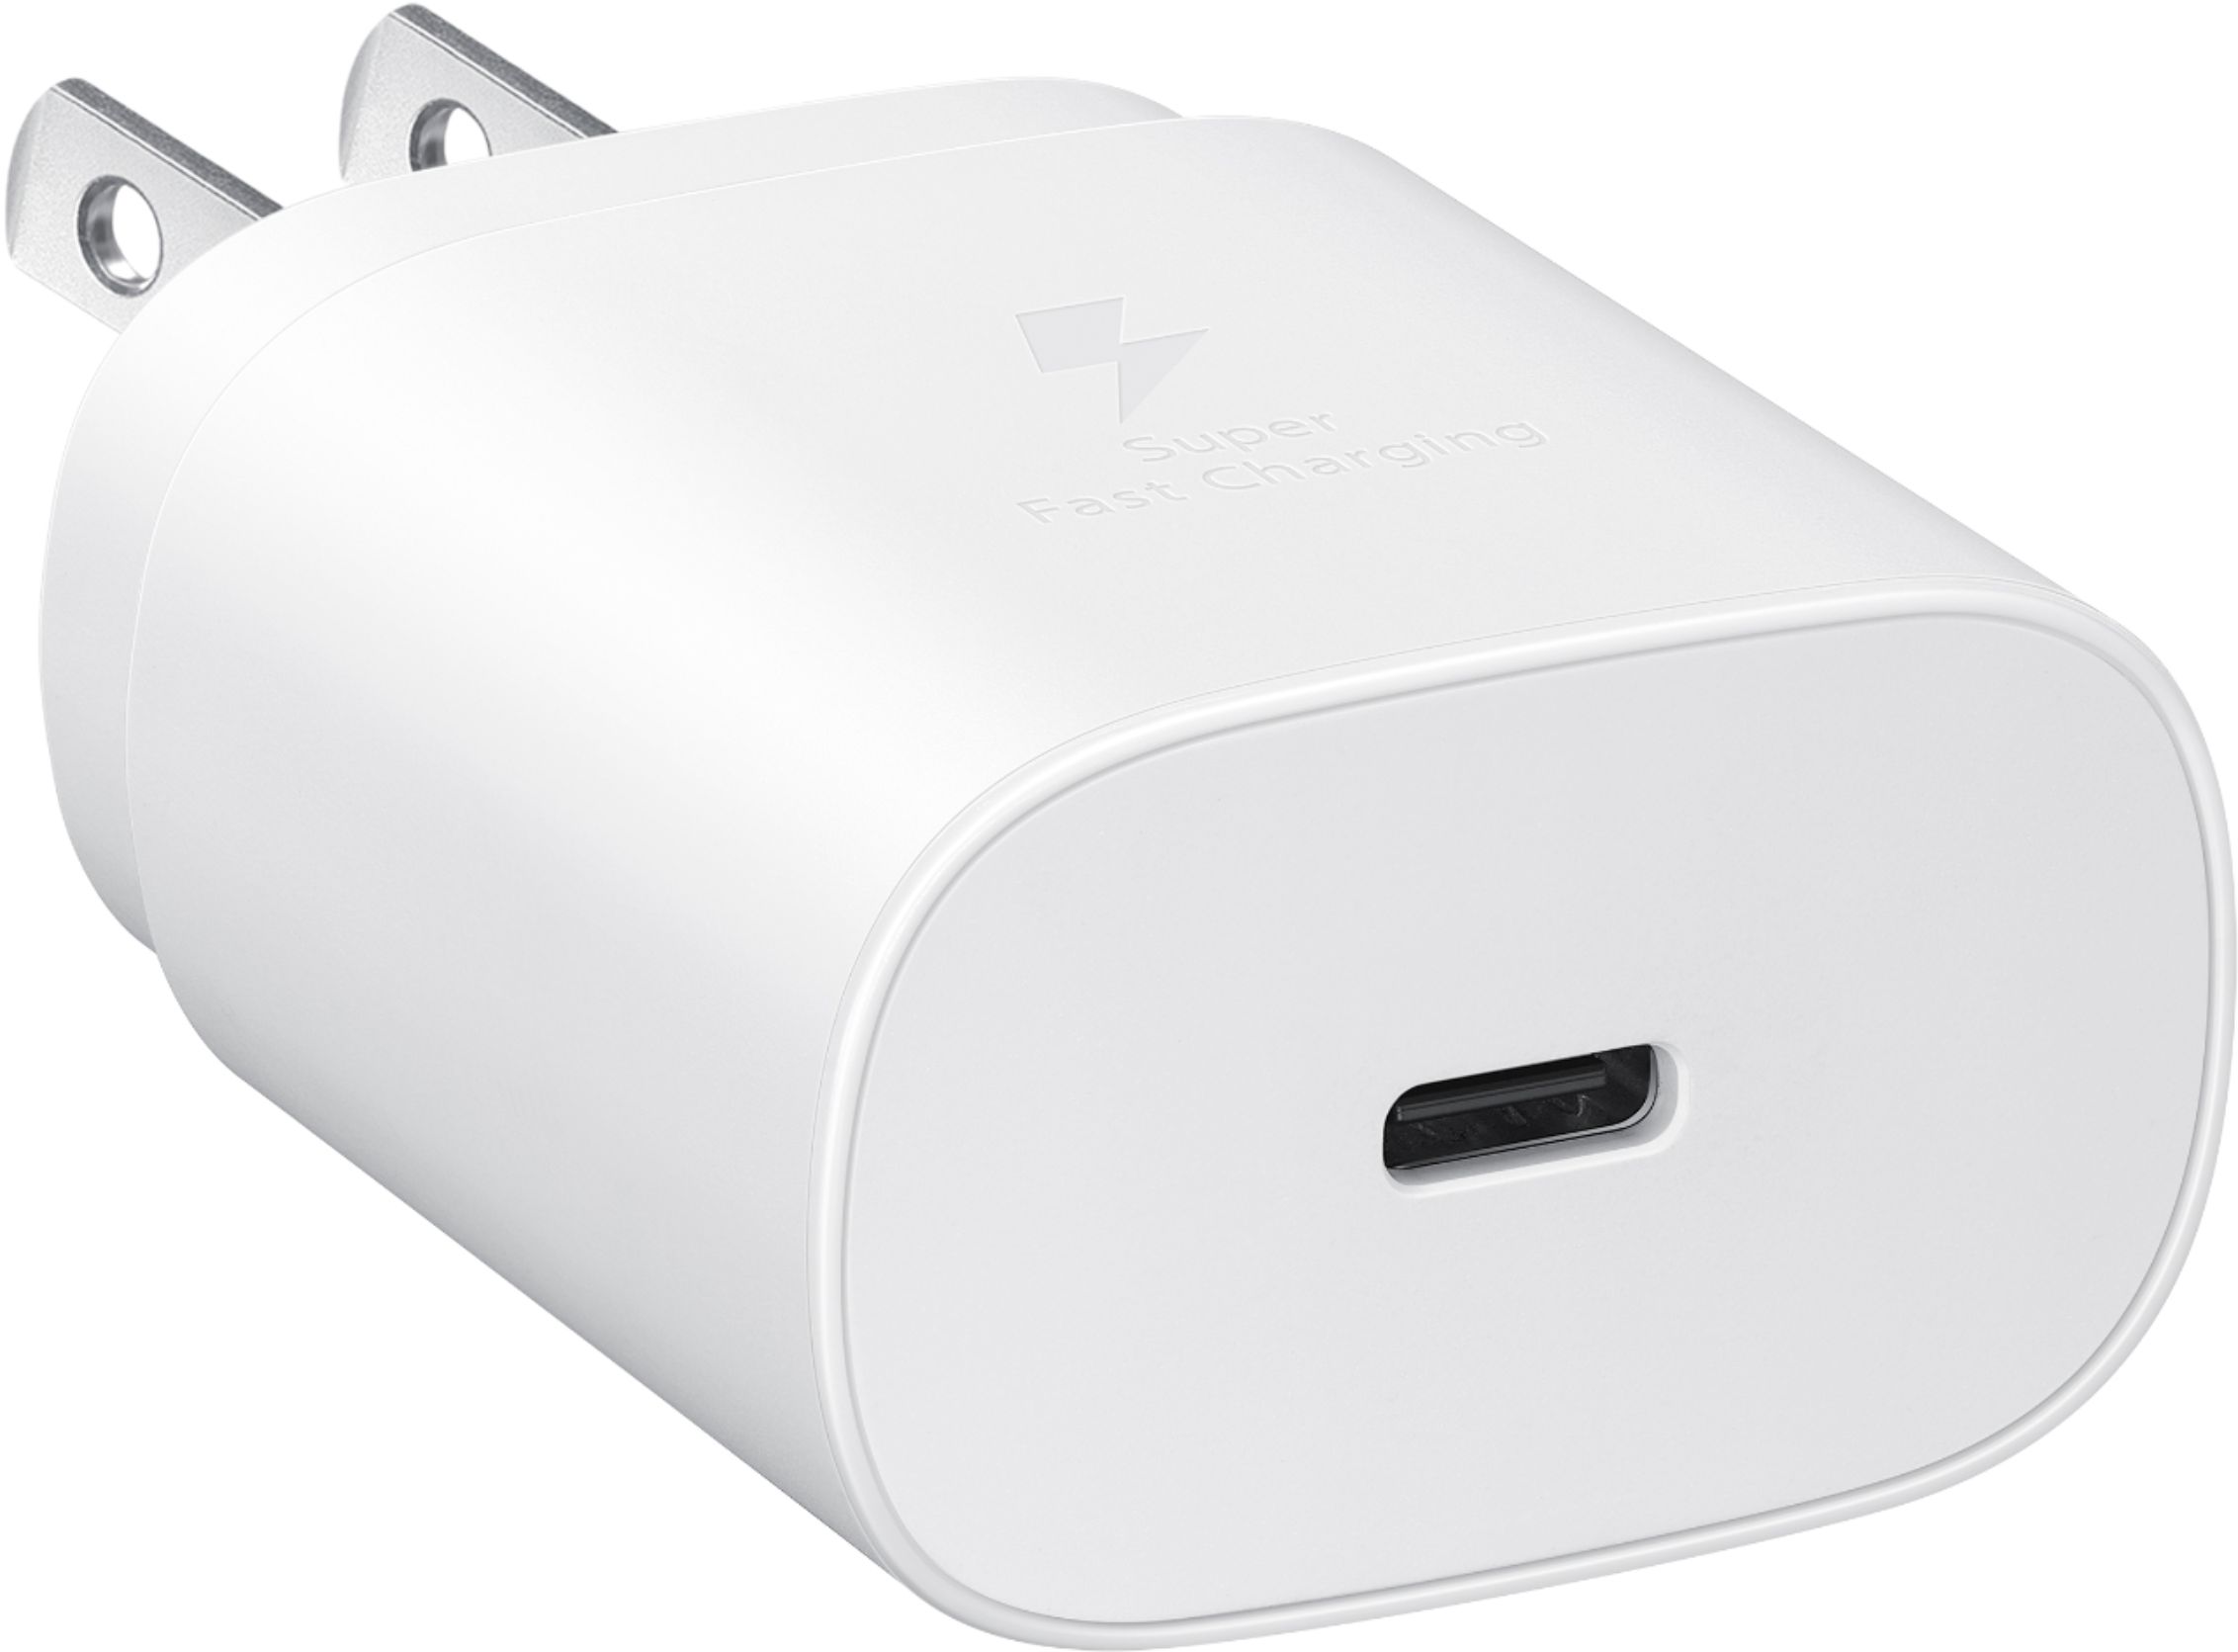 Samsung 25W Super Fast Wall Charger - White